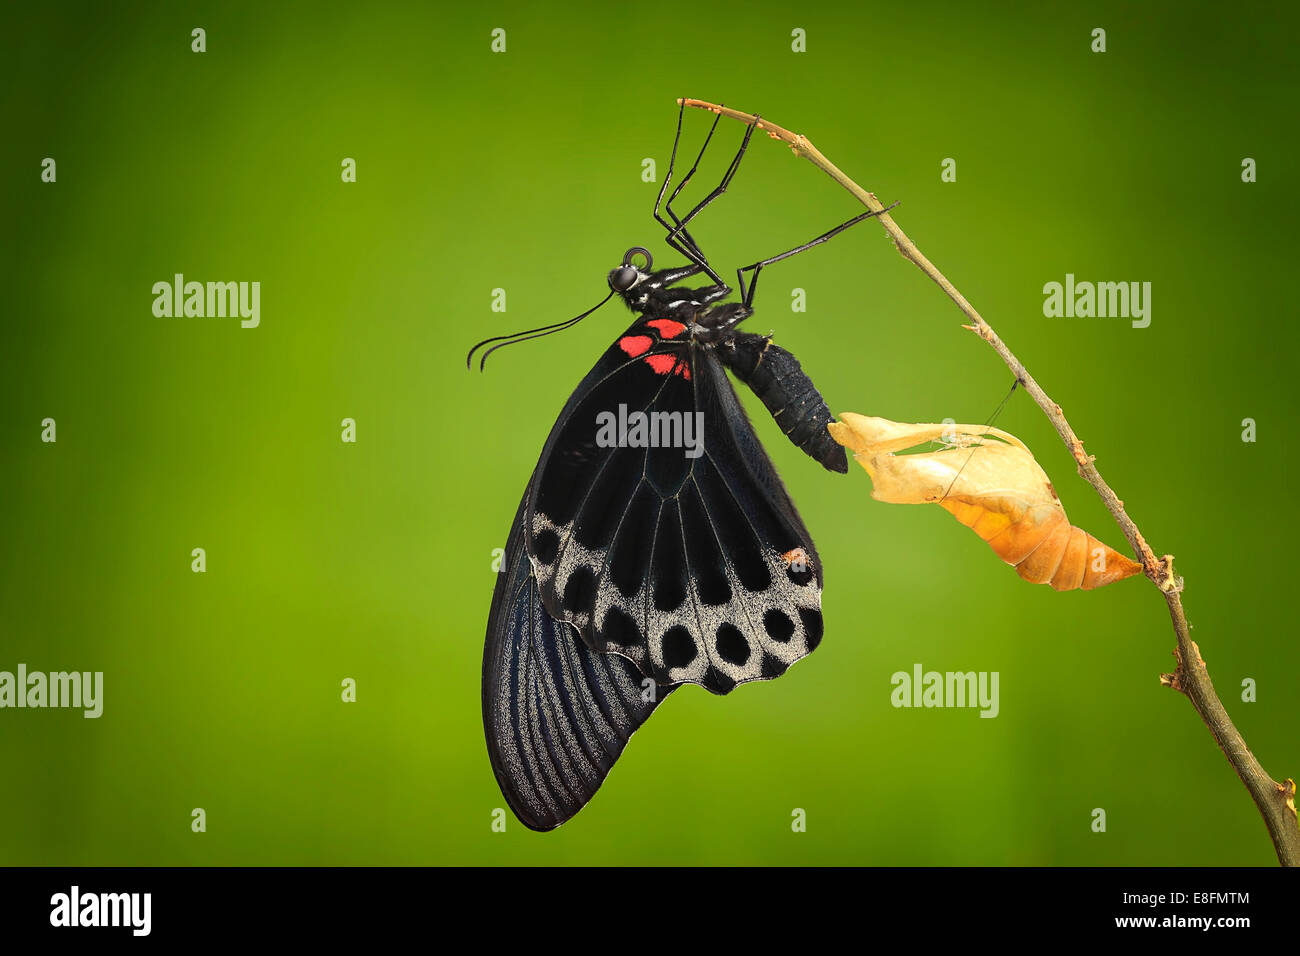 Butterfly emerging from its chrysalis, Jember, Indonesia Stock Photo